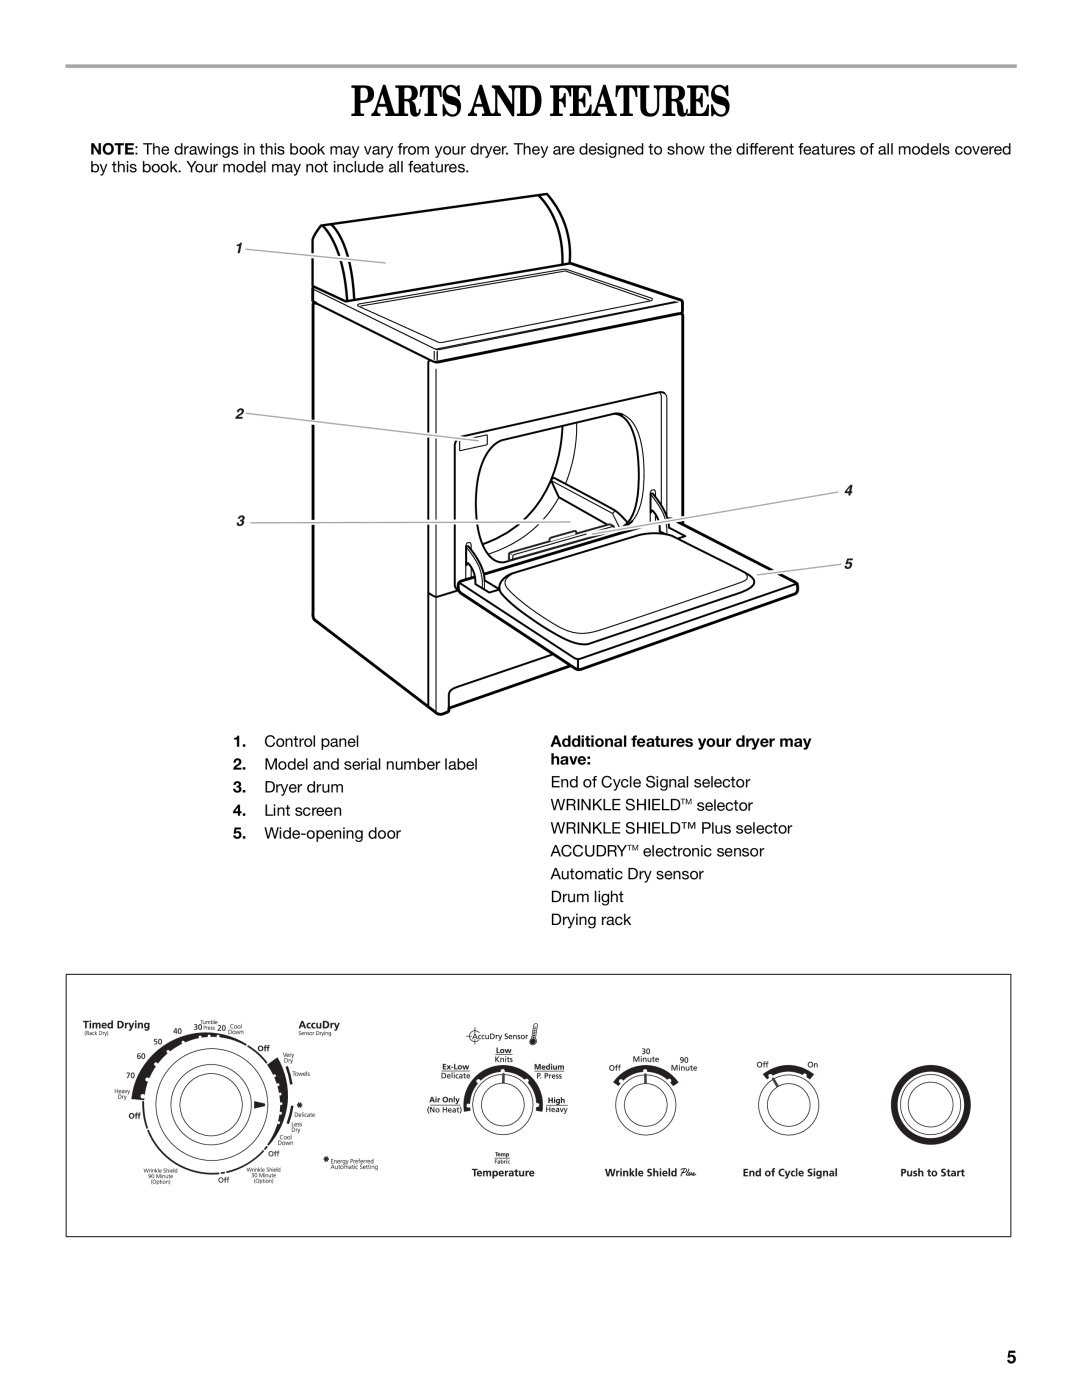 Whirlpool 8529302 manual Parts And Features, Additional features your dryer may have 